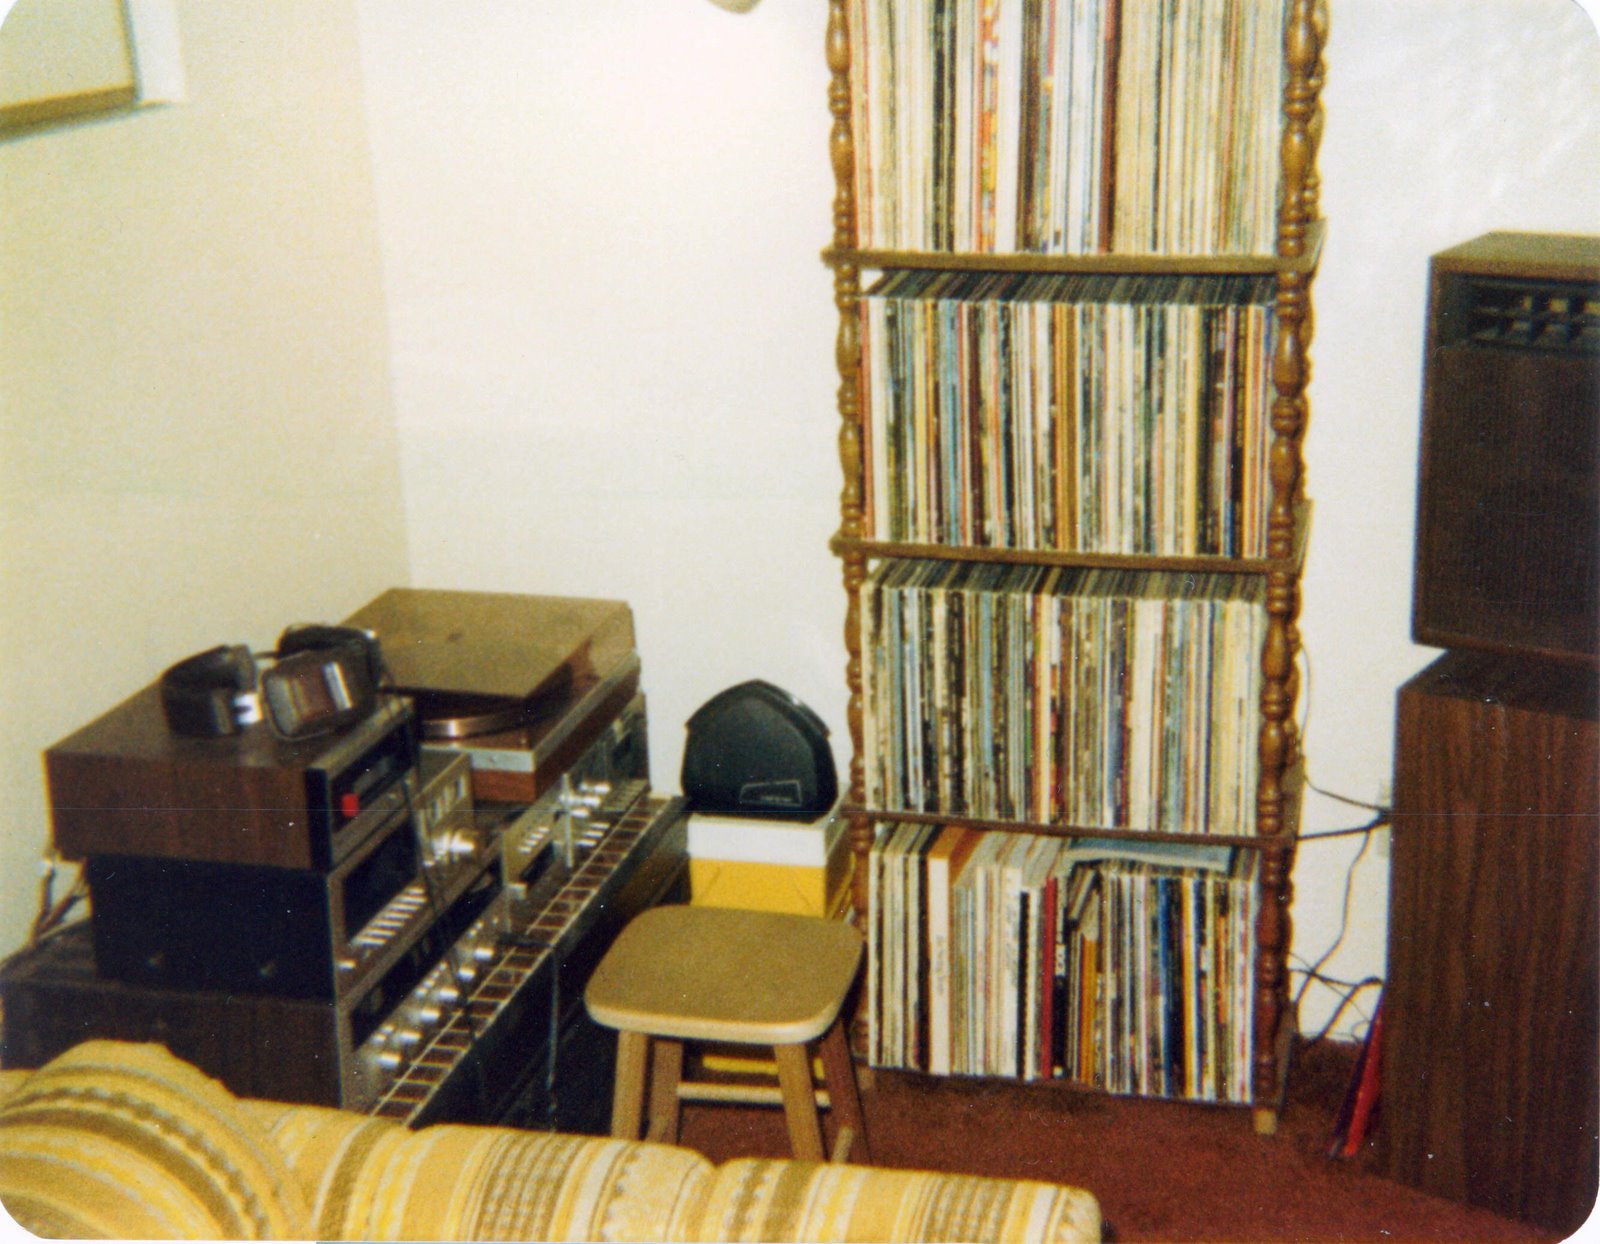 [My+Stereo+and+records+on+loft+in+T.O.+Nov+1980.jpg]